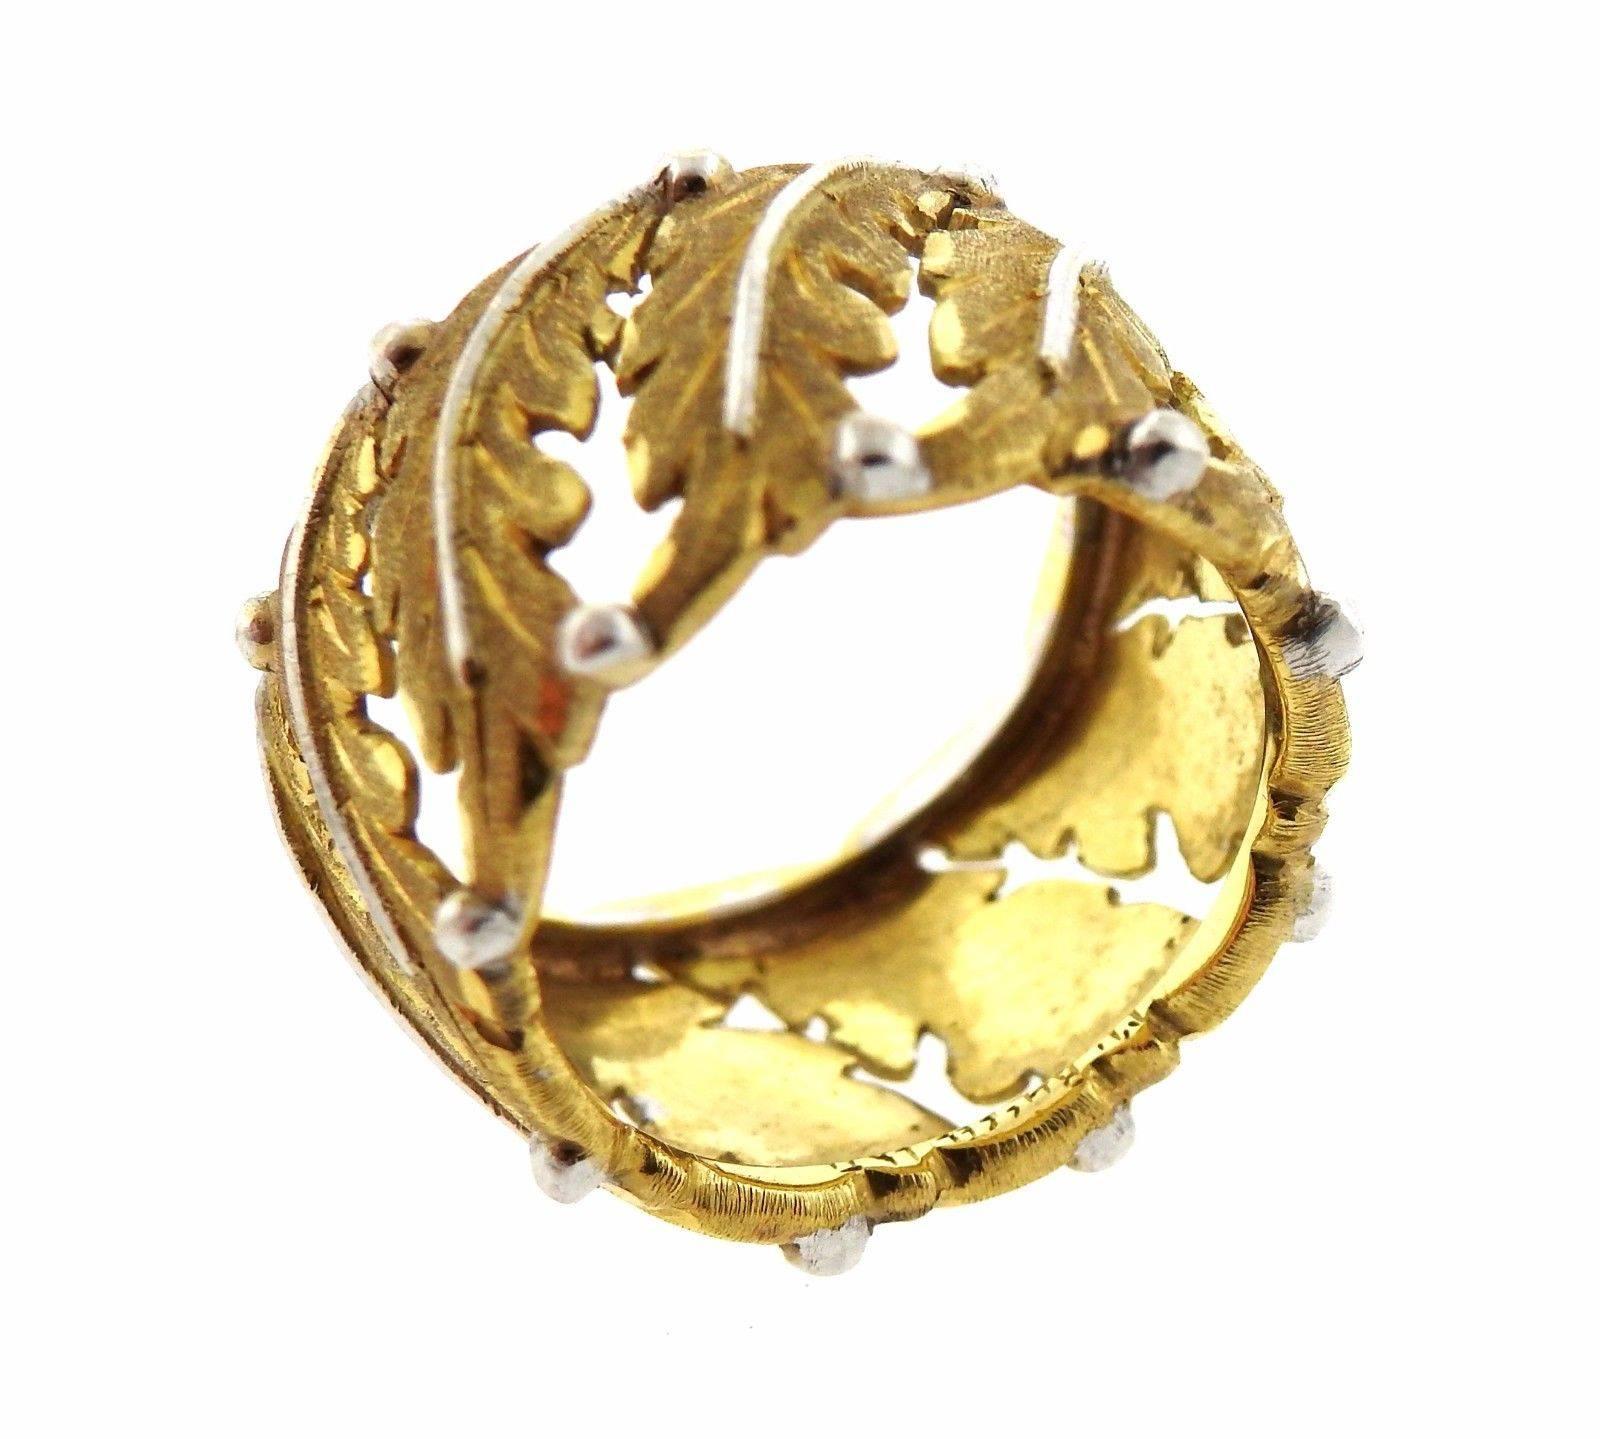 An 18k yellow and white gold ring by Buccellati.  The ring is a size 5.5 and measures 11.5mm wide.  The weight of the piece is 7.9 grams.  Marked Buccellati 750.